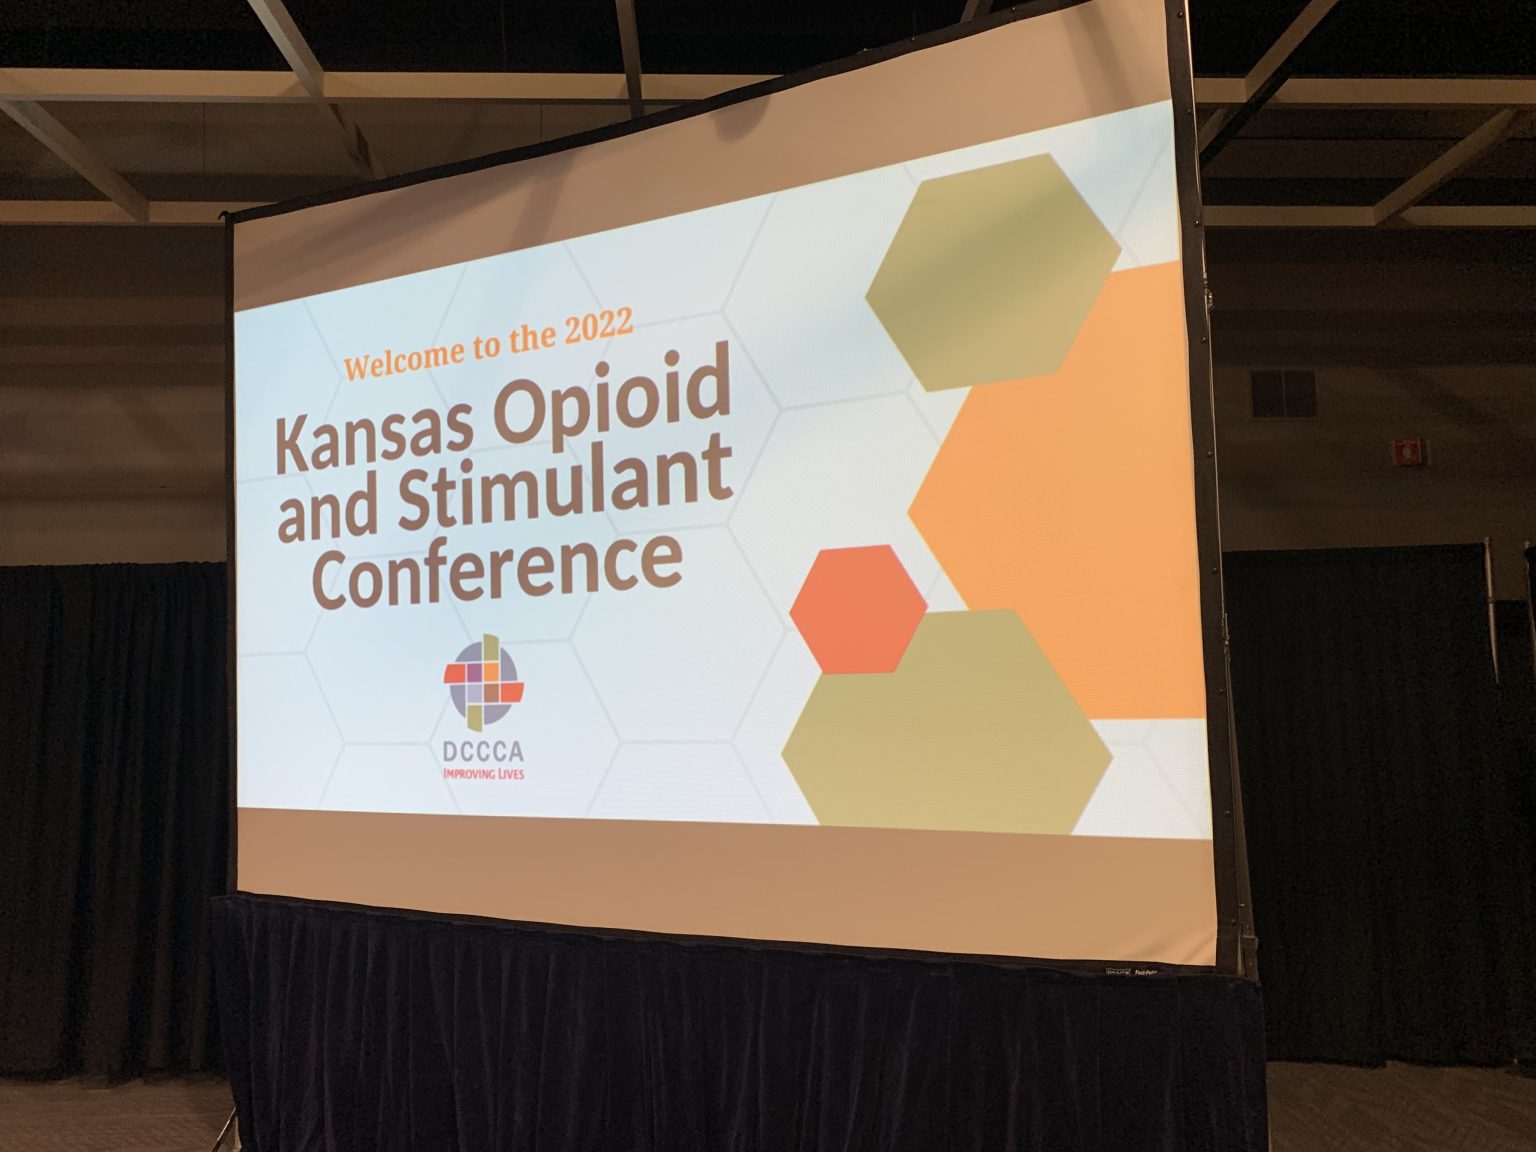 2022 Kansas Opioid and Stimulant Conference